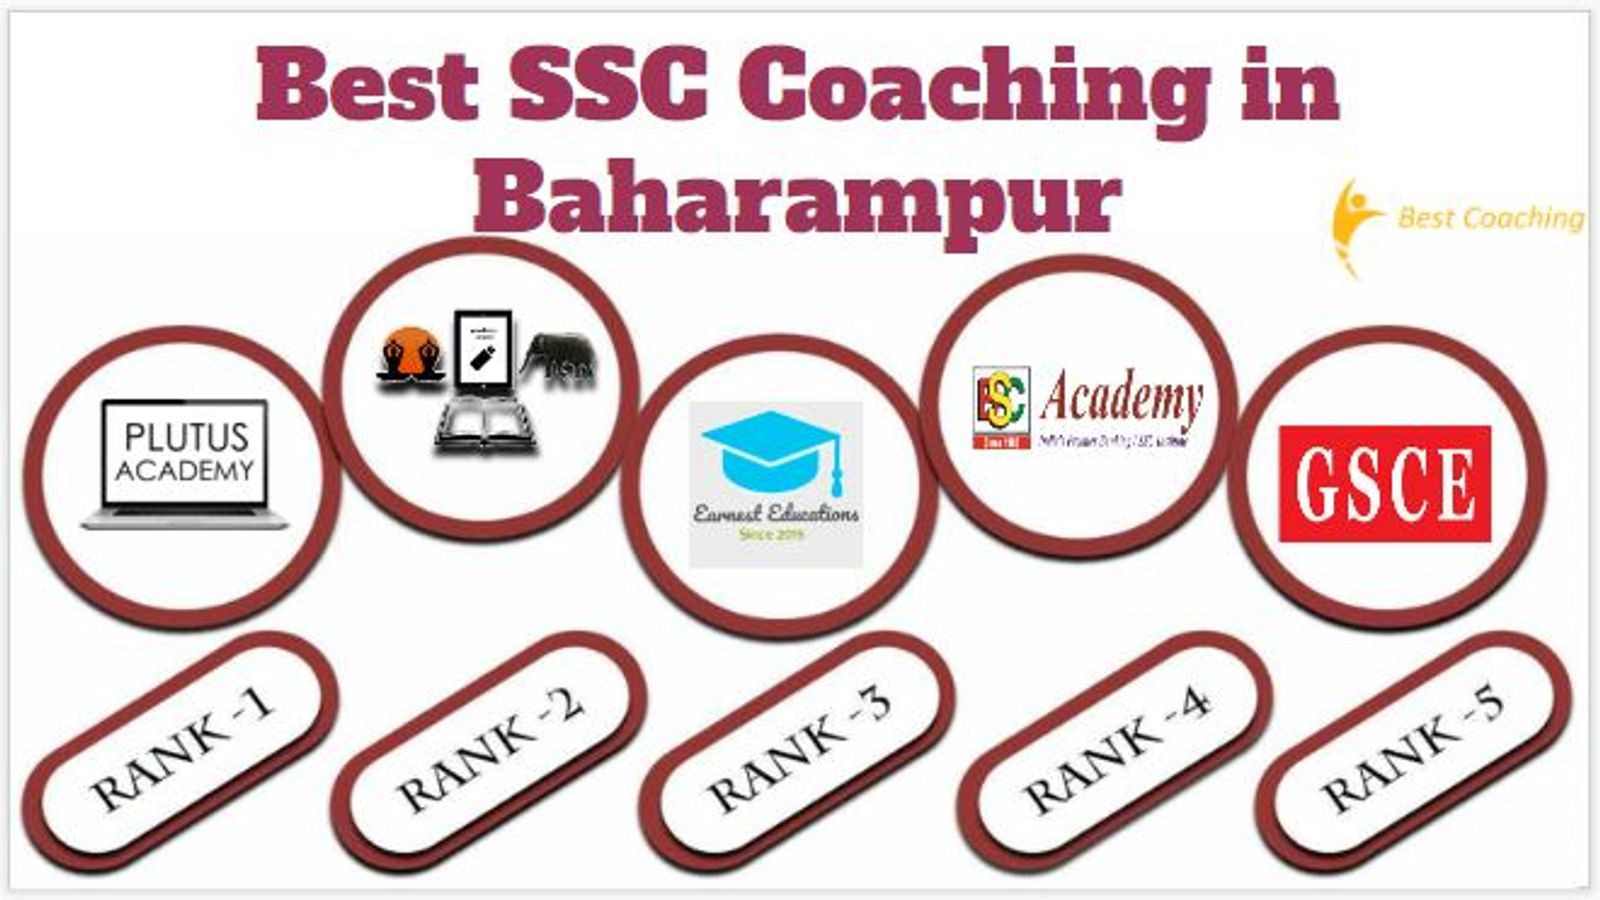 Best SSC Coaching in Baharampur